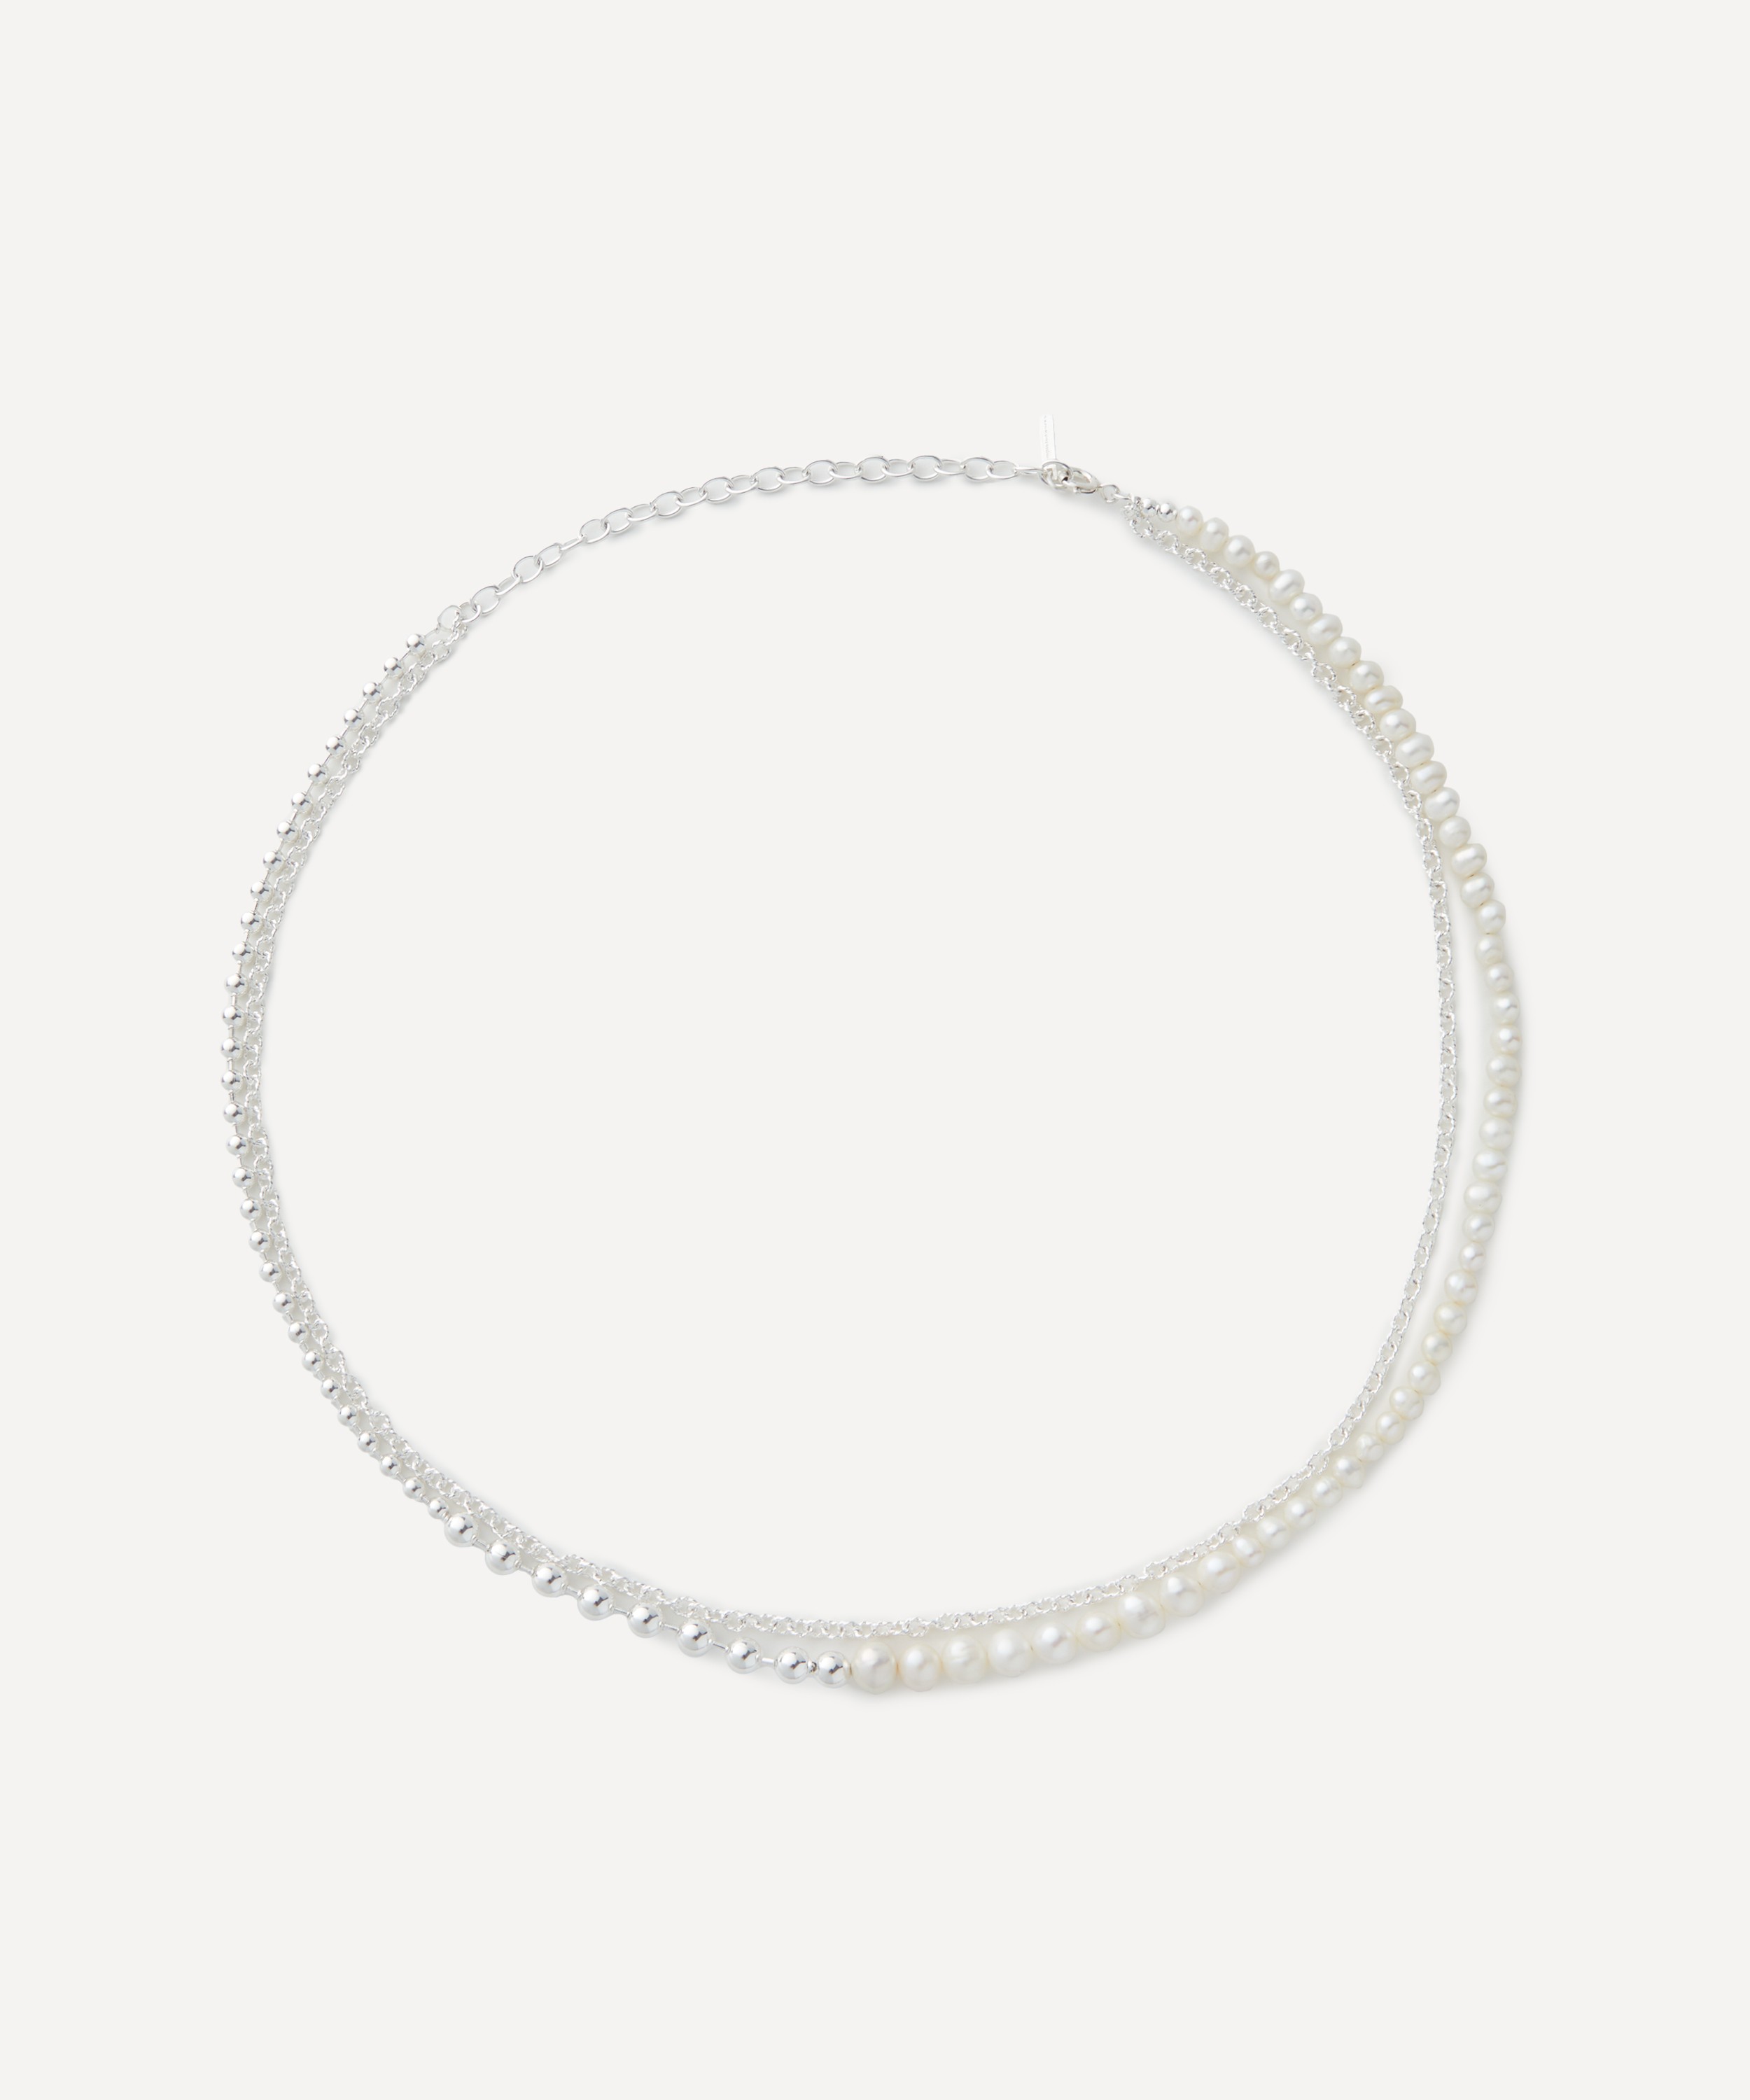 Completedworks - Rhodium-Plated Sterling Silver Forgotten Seas Necklace